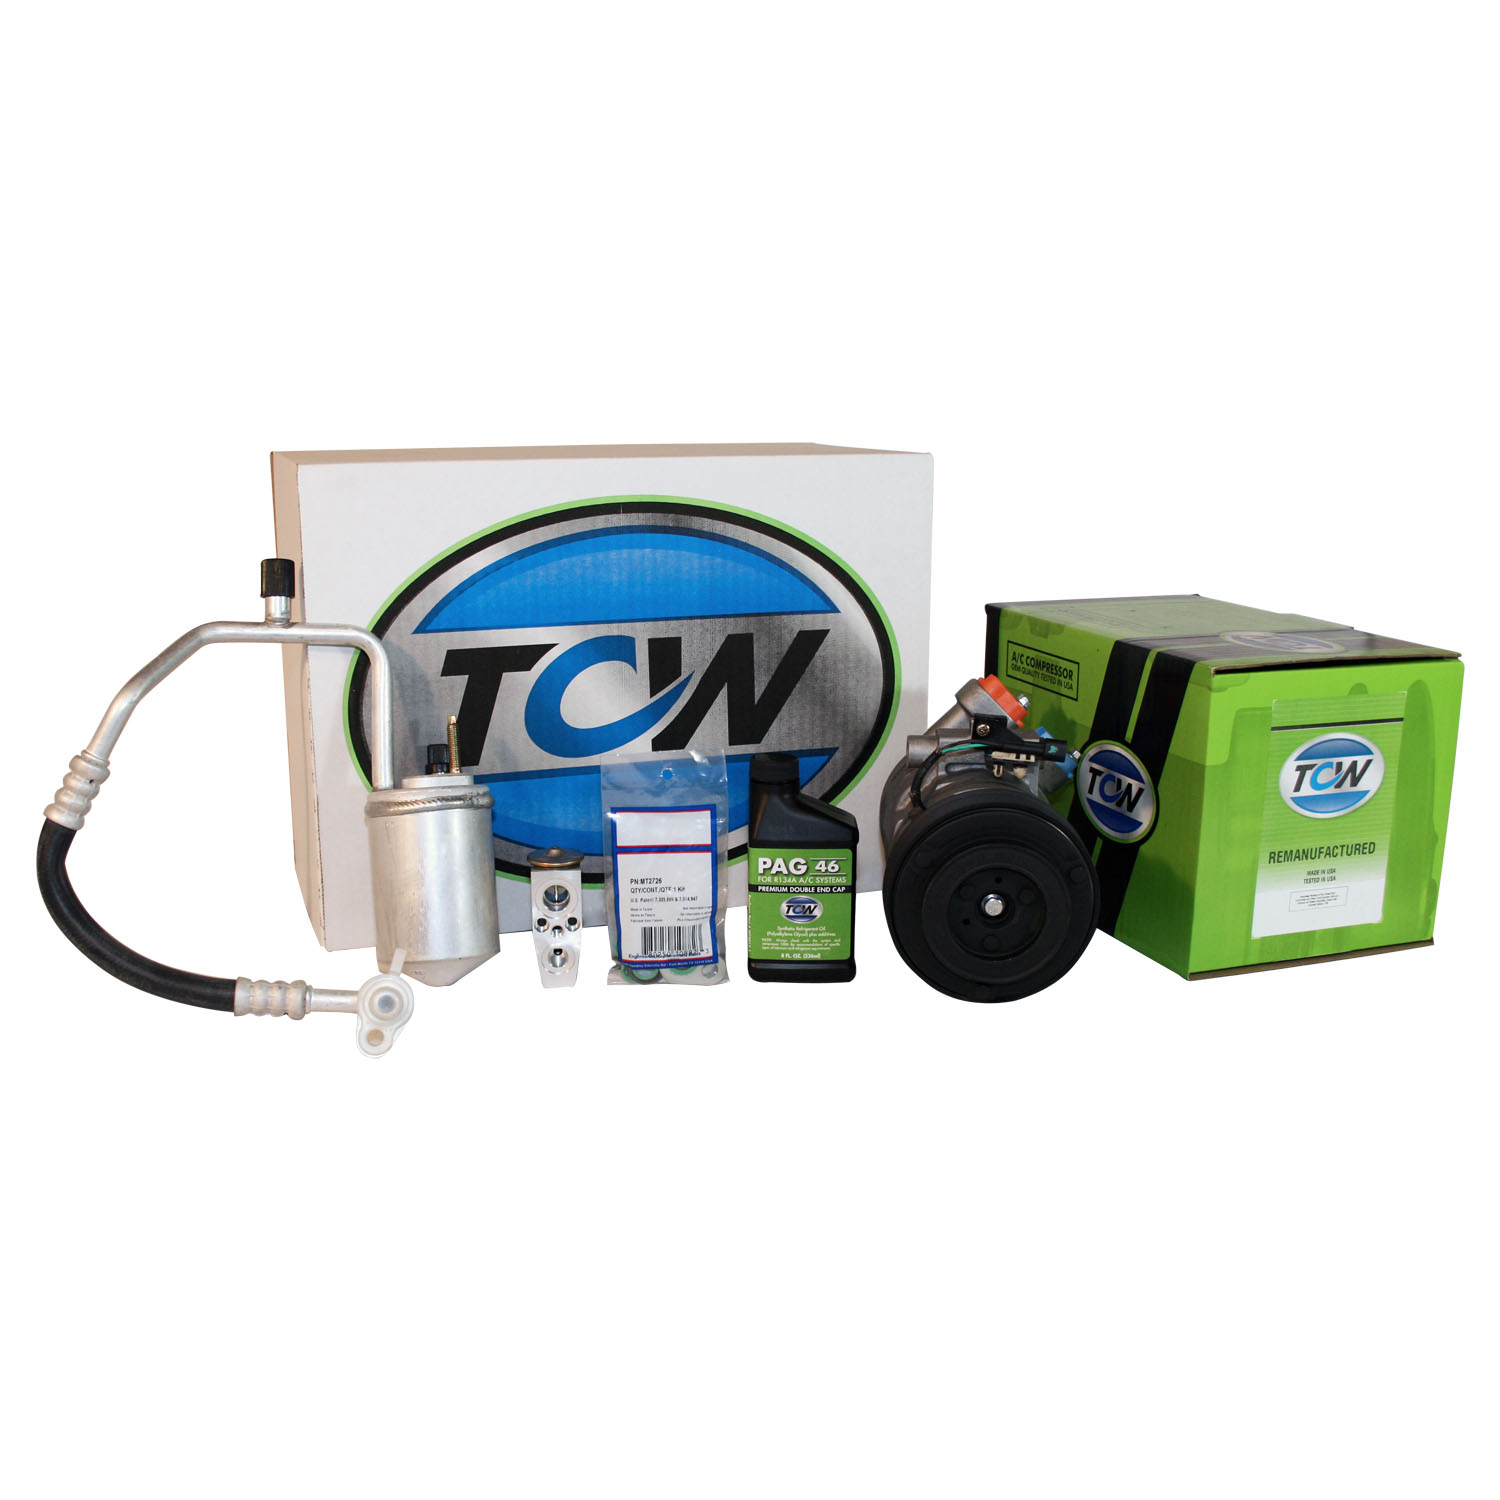 TCW Vehicle A/C Kit K1000509R Remanufactured